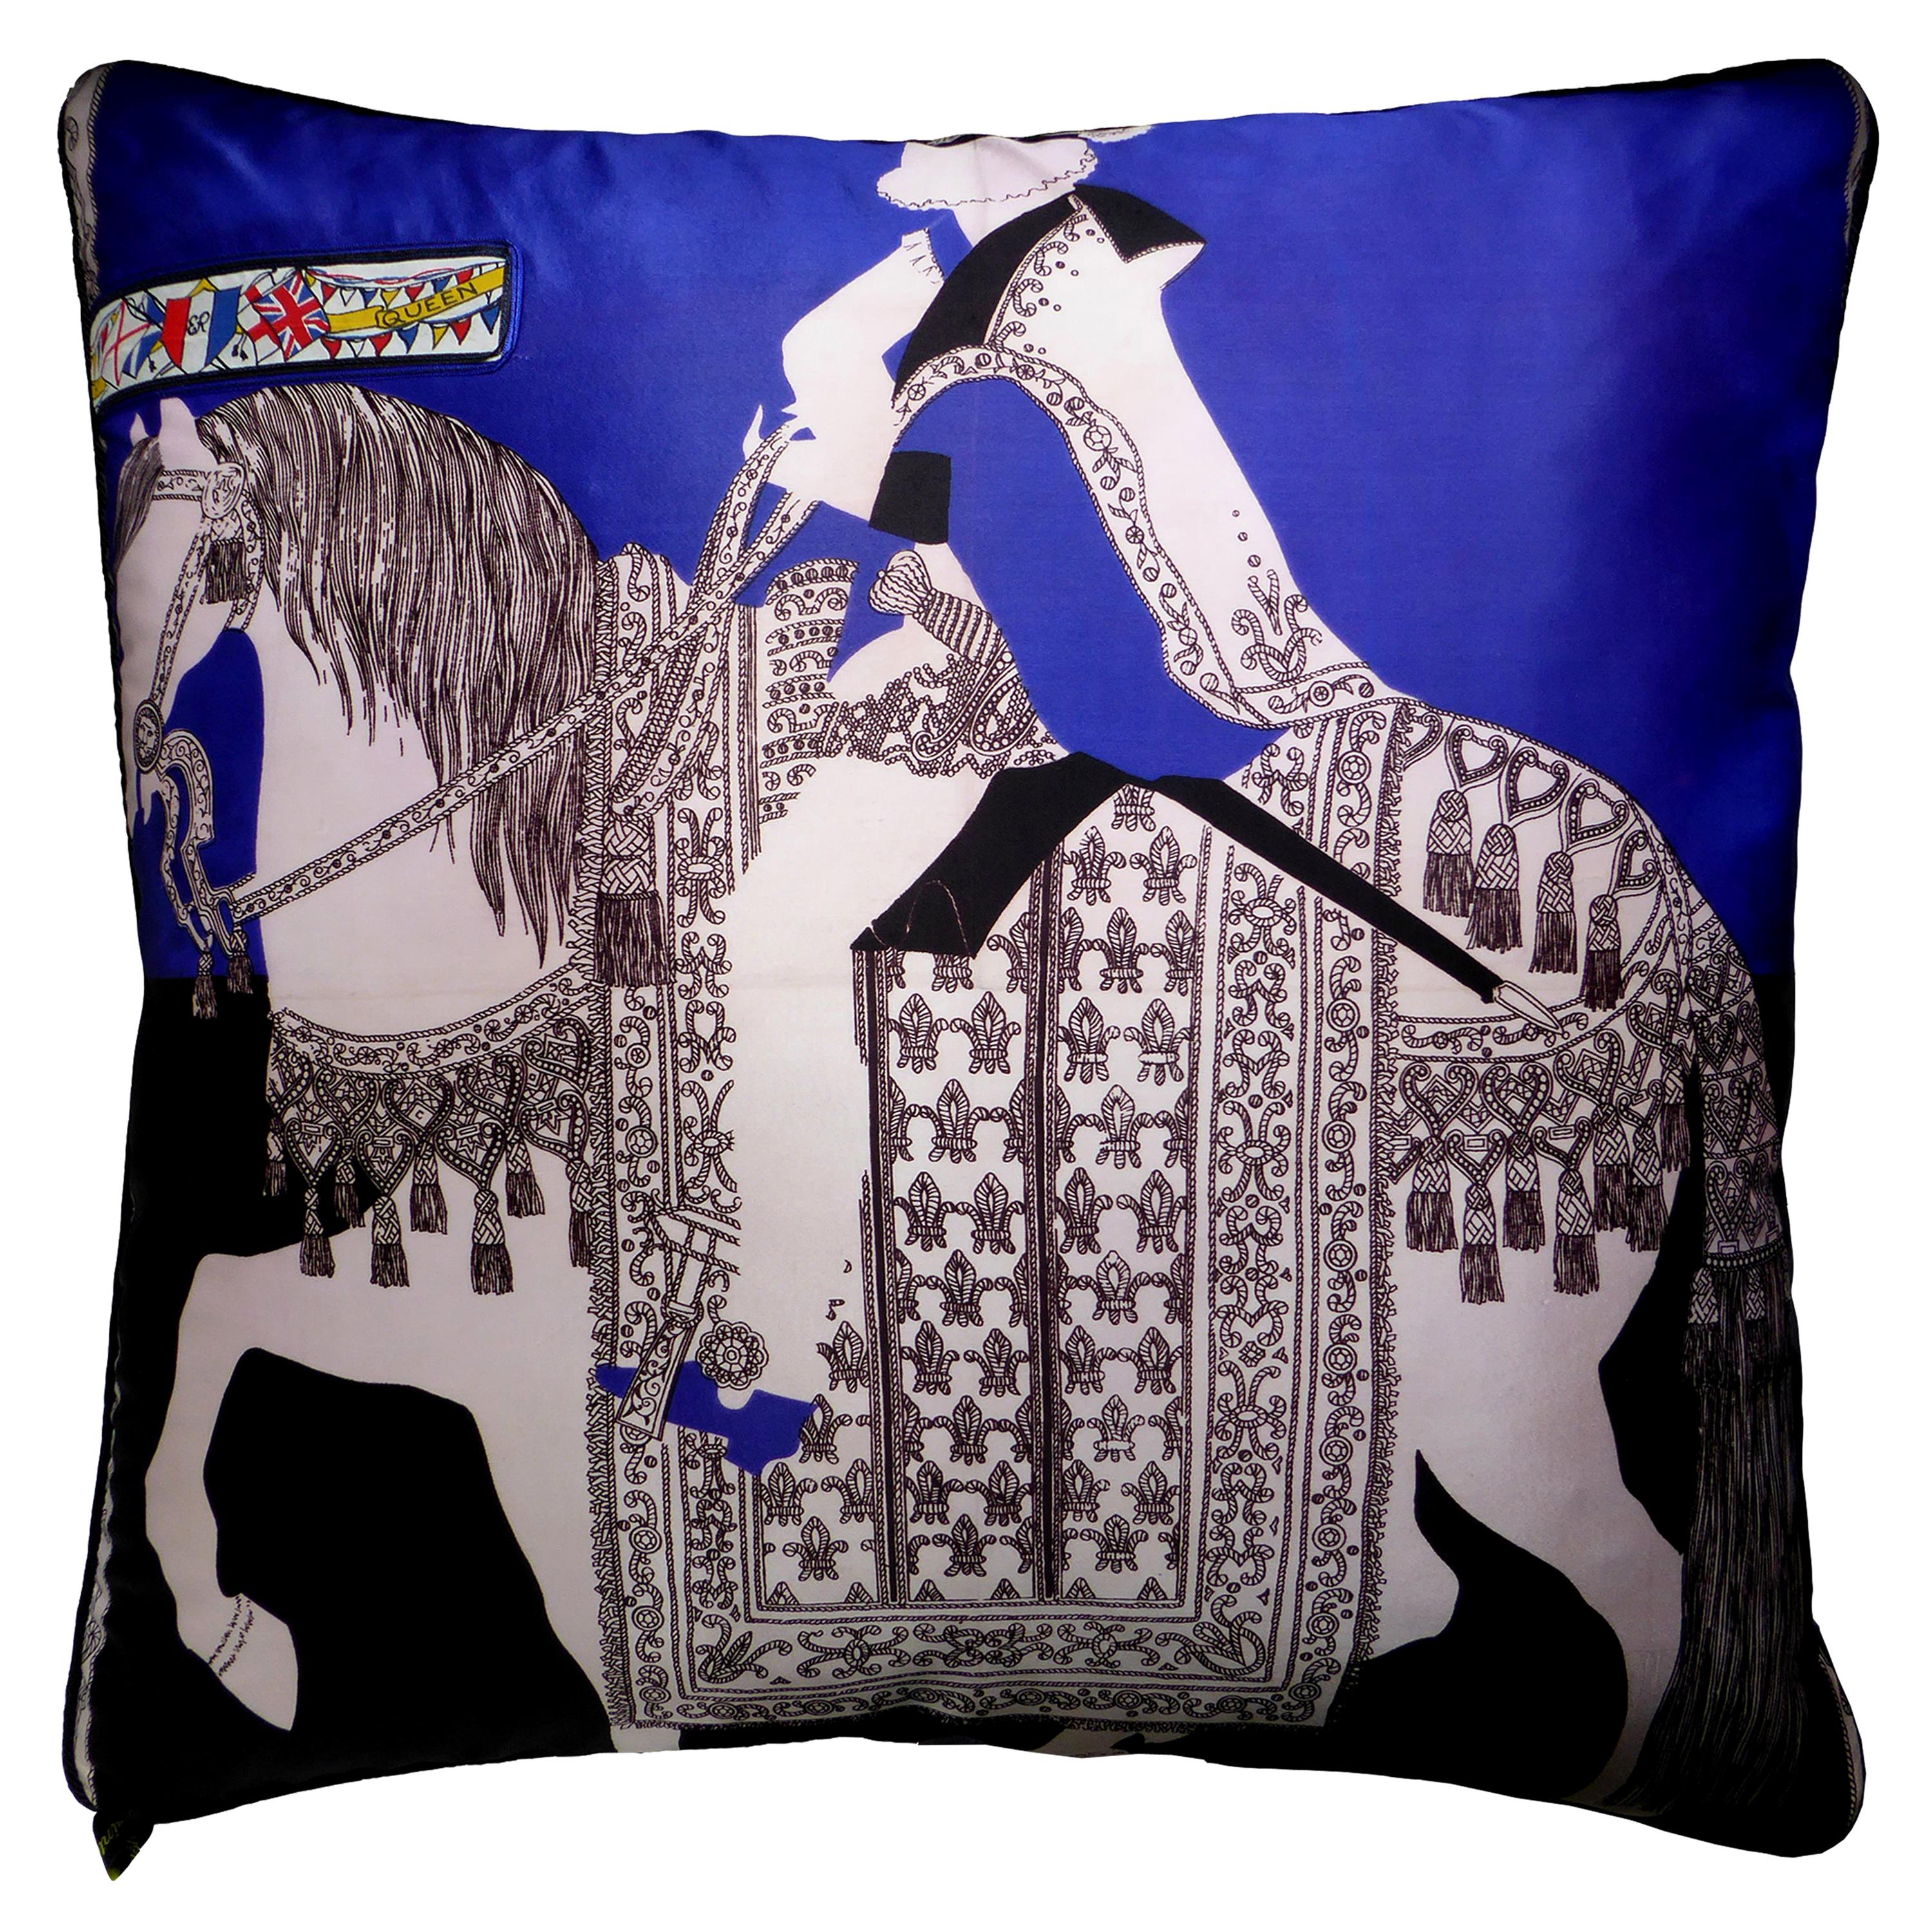 'Vintage Cushions', Luxury Bespoke-Made Pillow 'Medieval Pageant' British Made